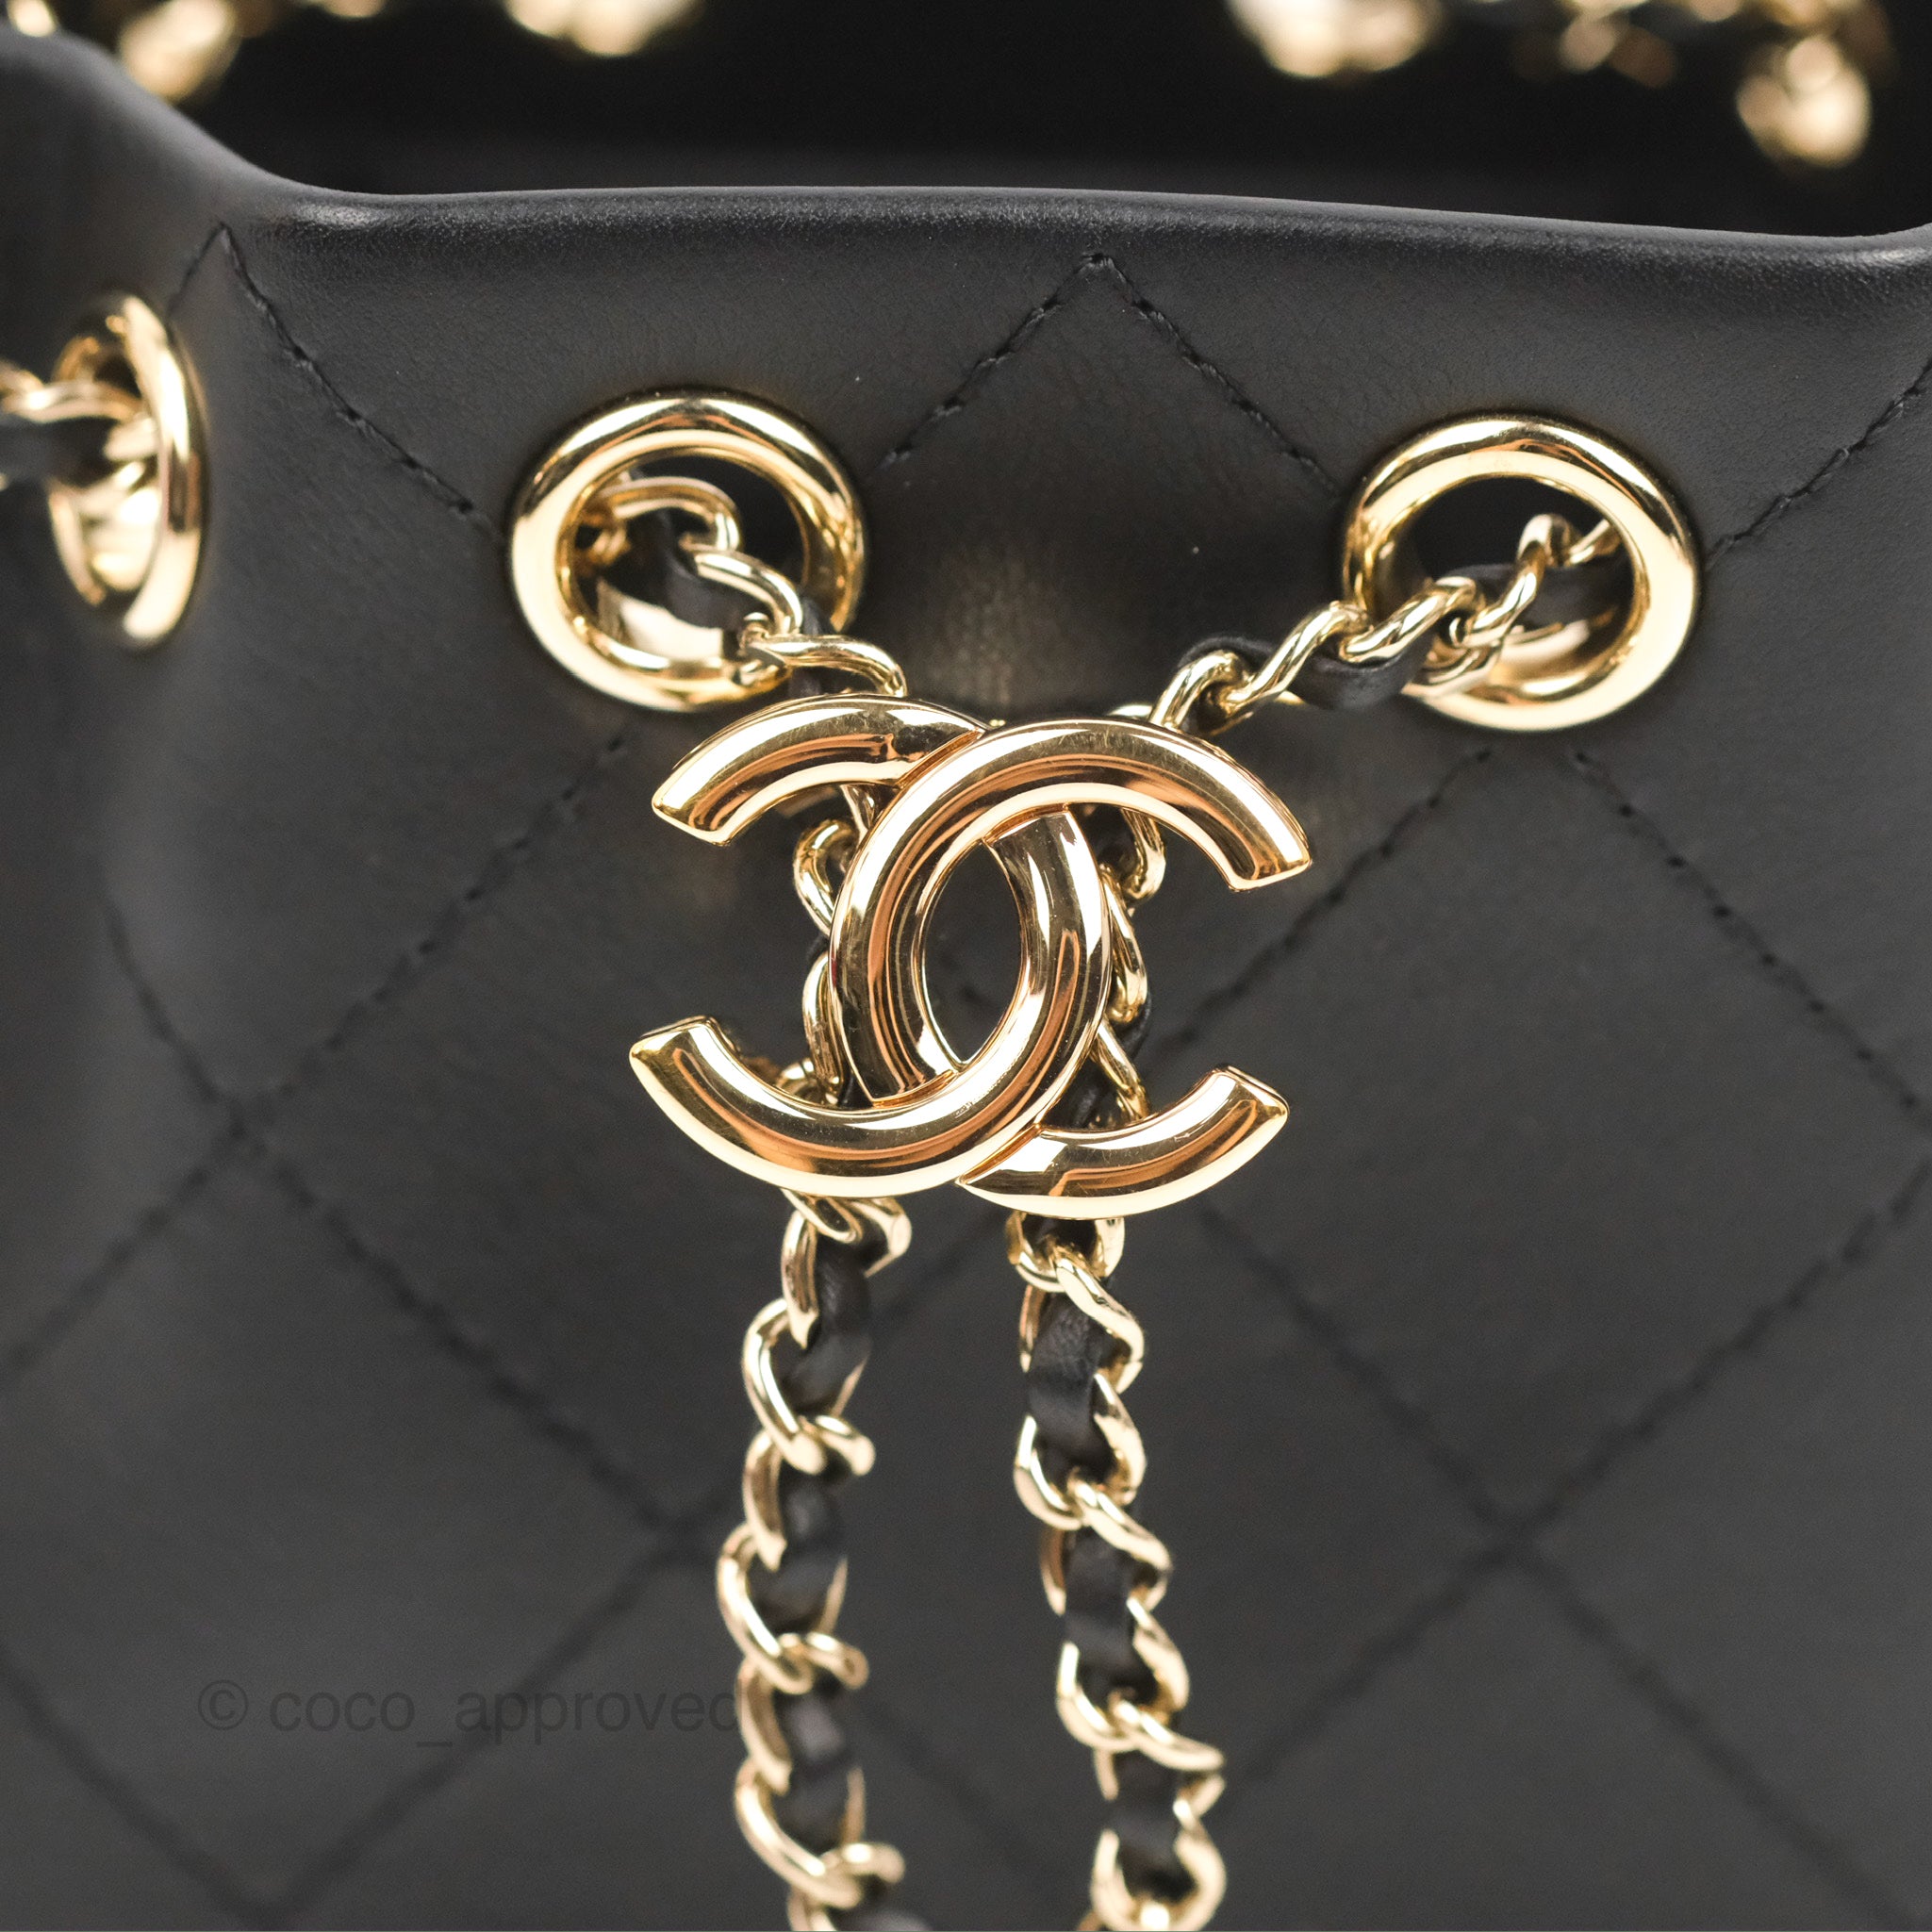 Chanel Black Fur Drawstring Bag with Gold and Silver Hardware